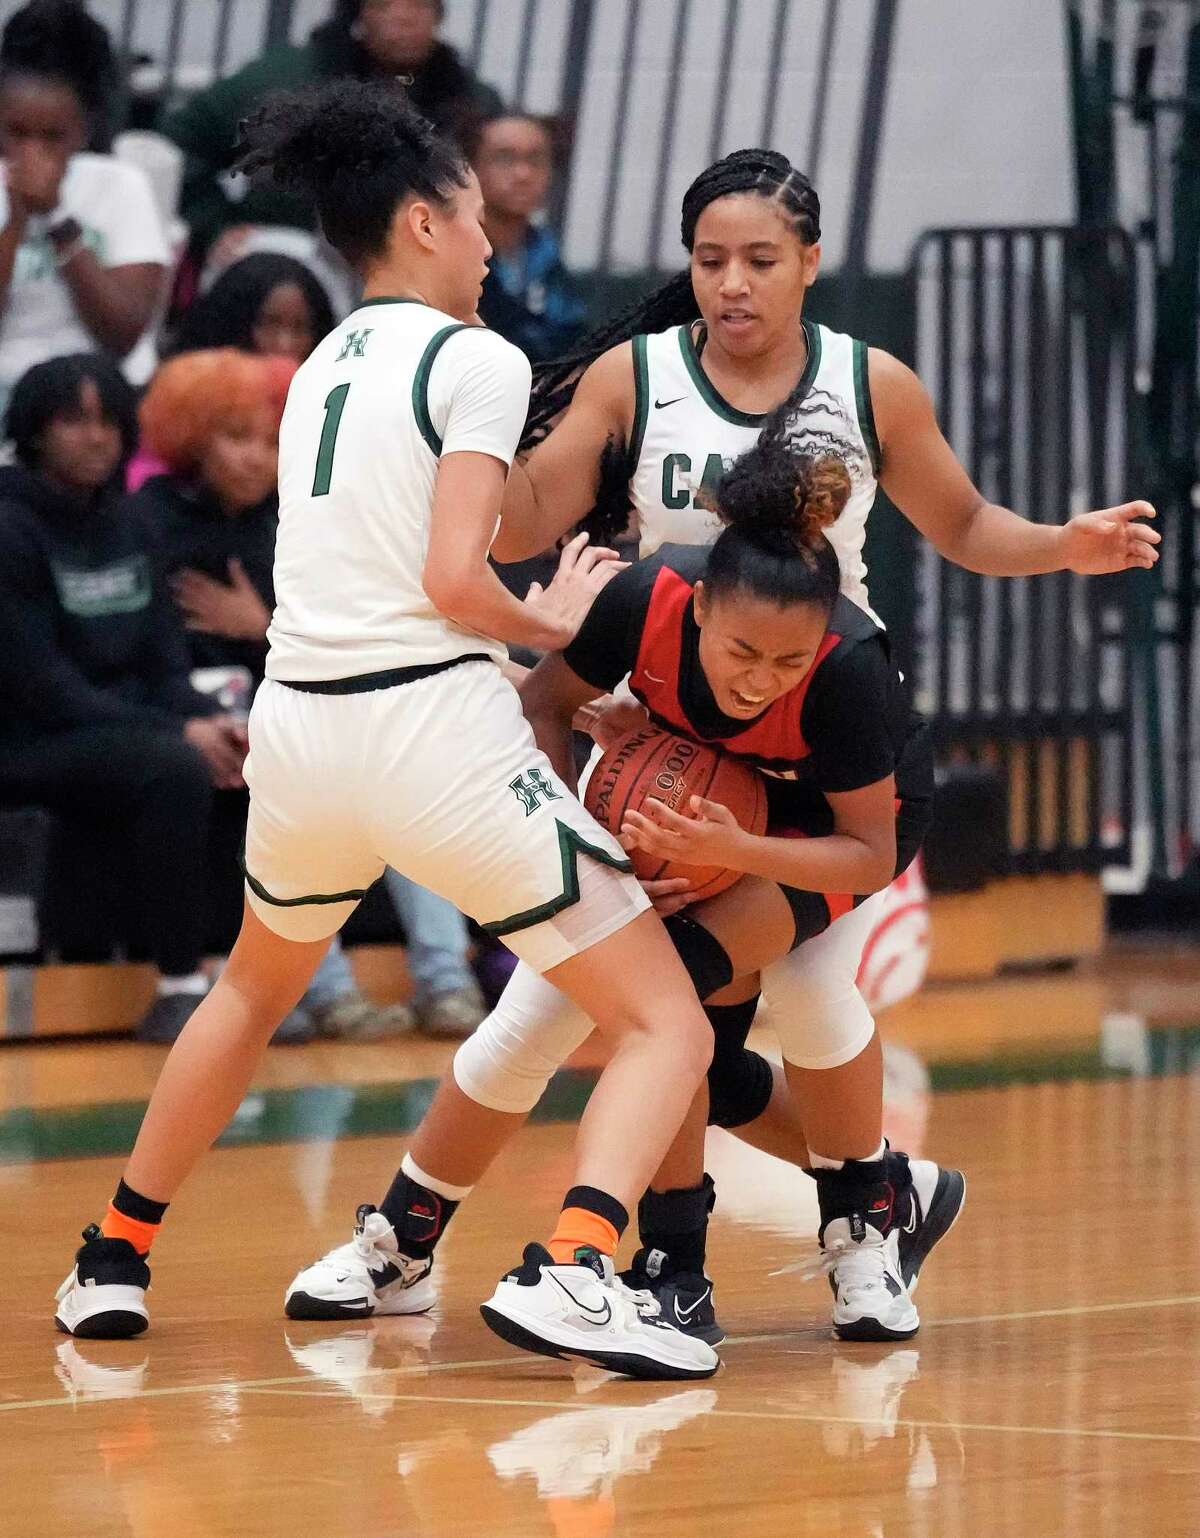 Fort Bend Austin's Aminah Dixon (4) is squeezed by Hightower High School's Kailee Beaudion (1) and Chandler Caver (3) during the second half of a District 20-6A girls basketball game at Hightower High School on Friday, Jan. 6, 2023 in Missouri City. Fort Bend Austin beat Hightower 26-23.